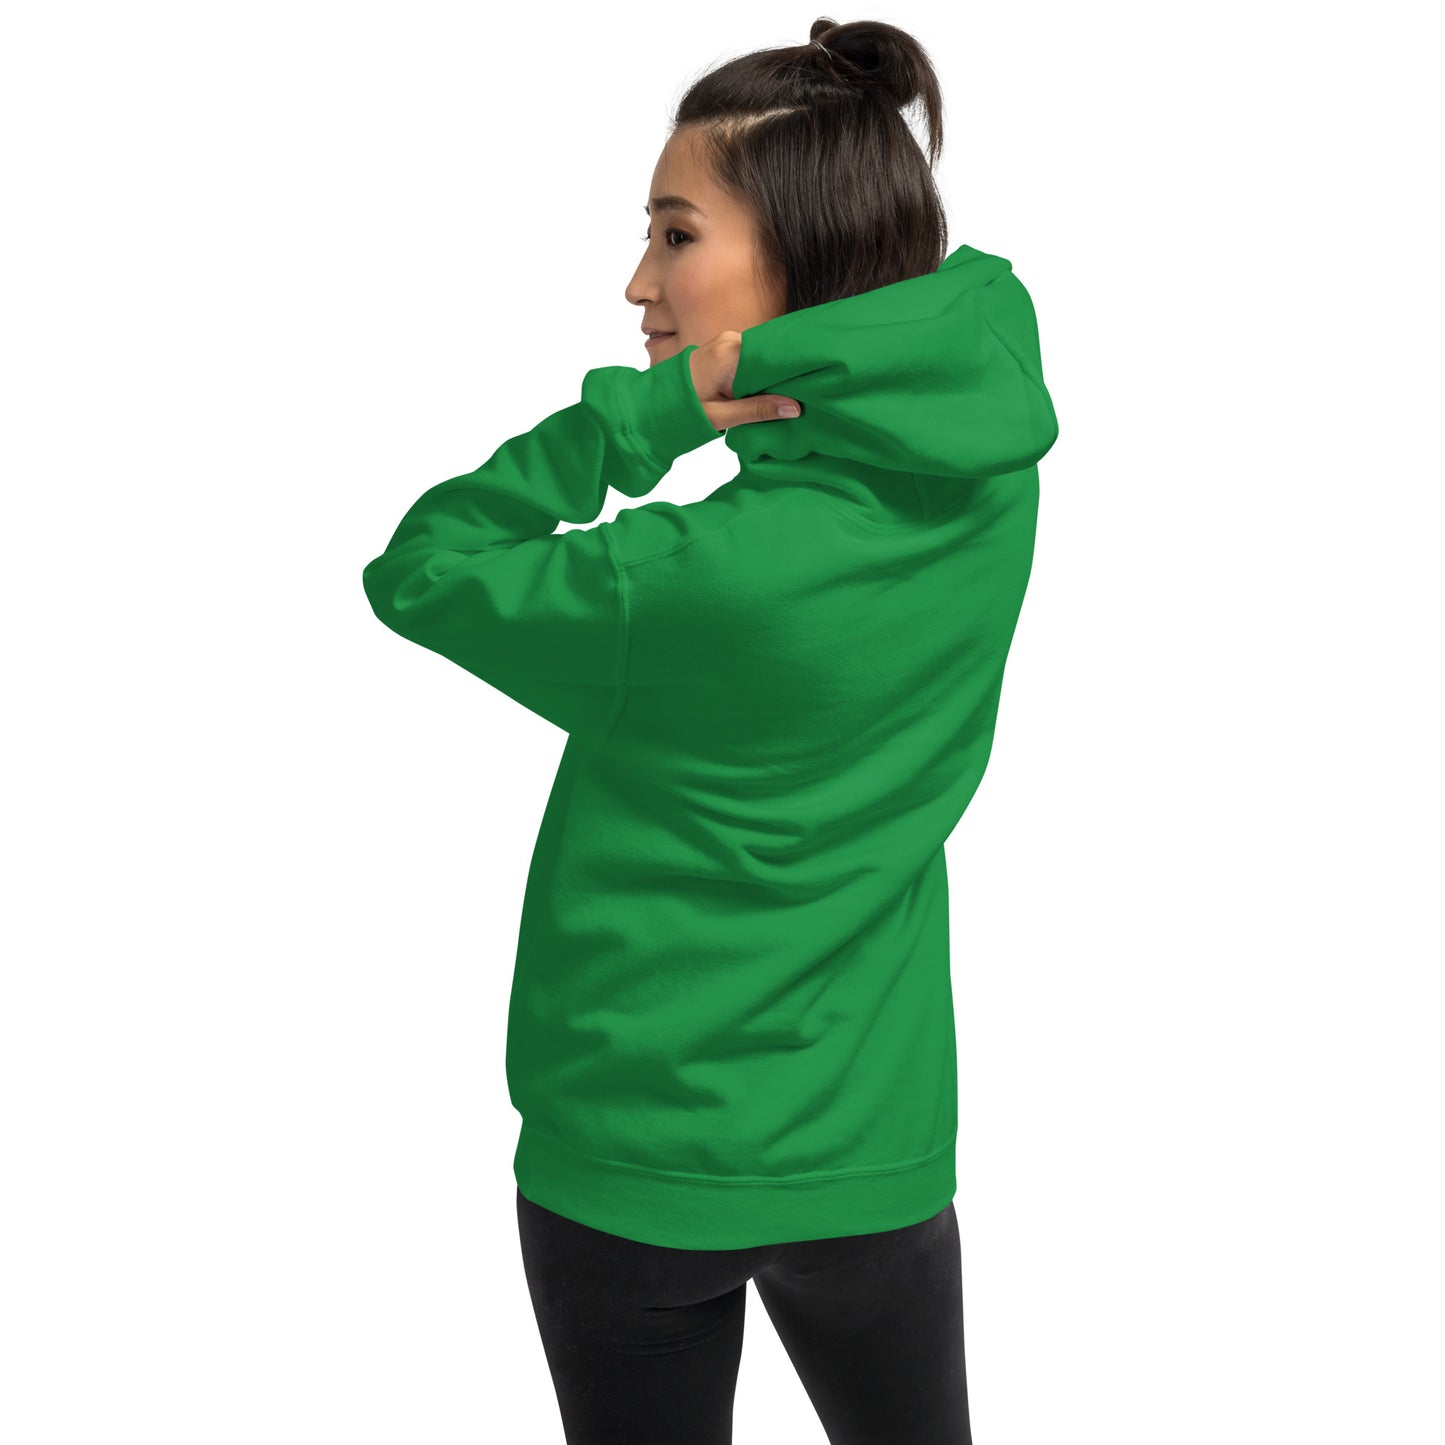 Irish green colored unisex cotton/polyester blend hoodie. Features front design of Mushy and his whimsical mushroom friends. Hoodie has double lined hood, front pouch pocket, rib knit cuffs and stretchy waistband. Back view shown on female model.